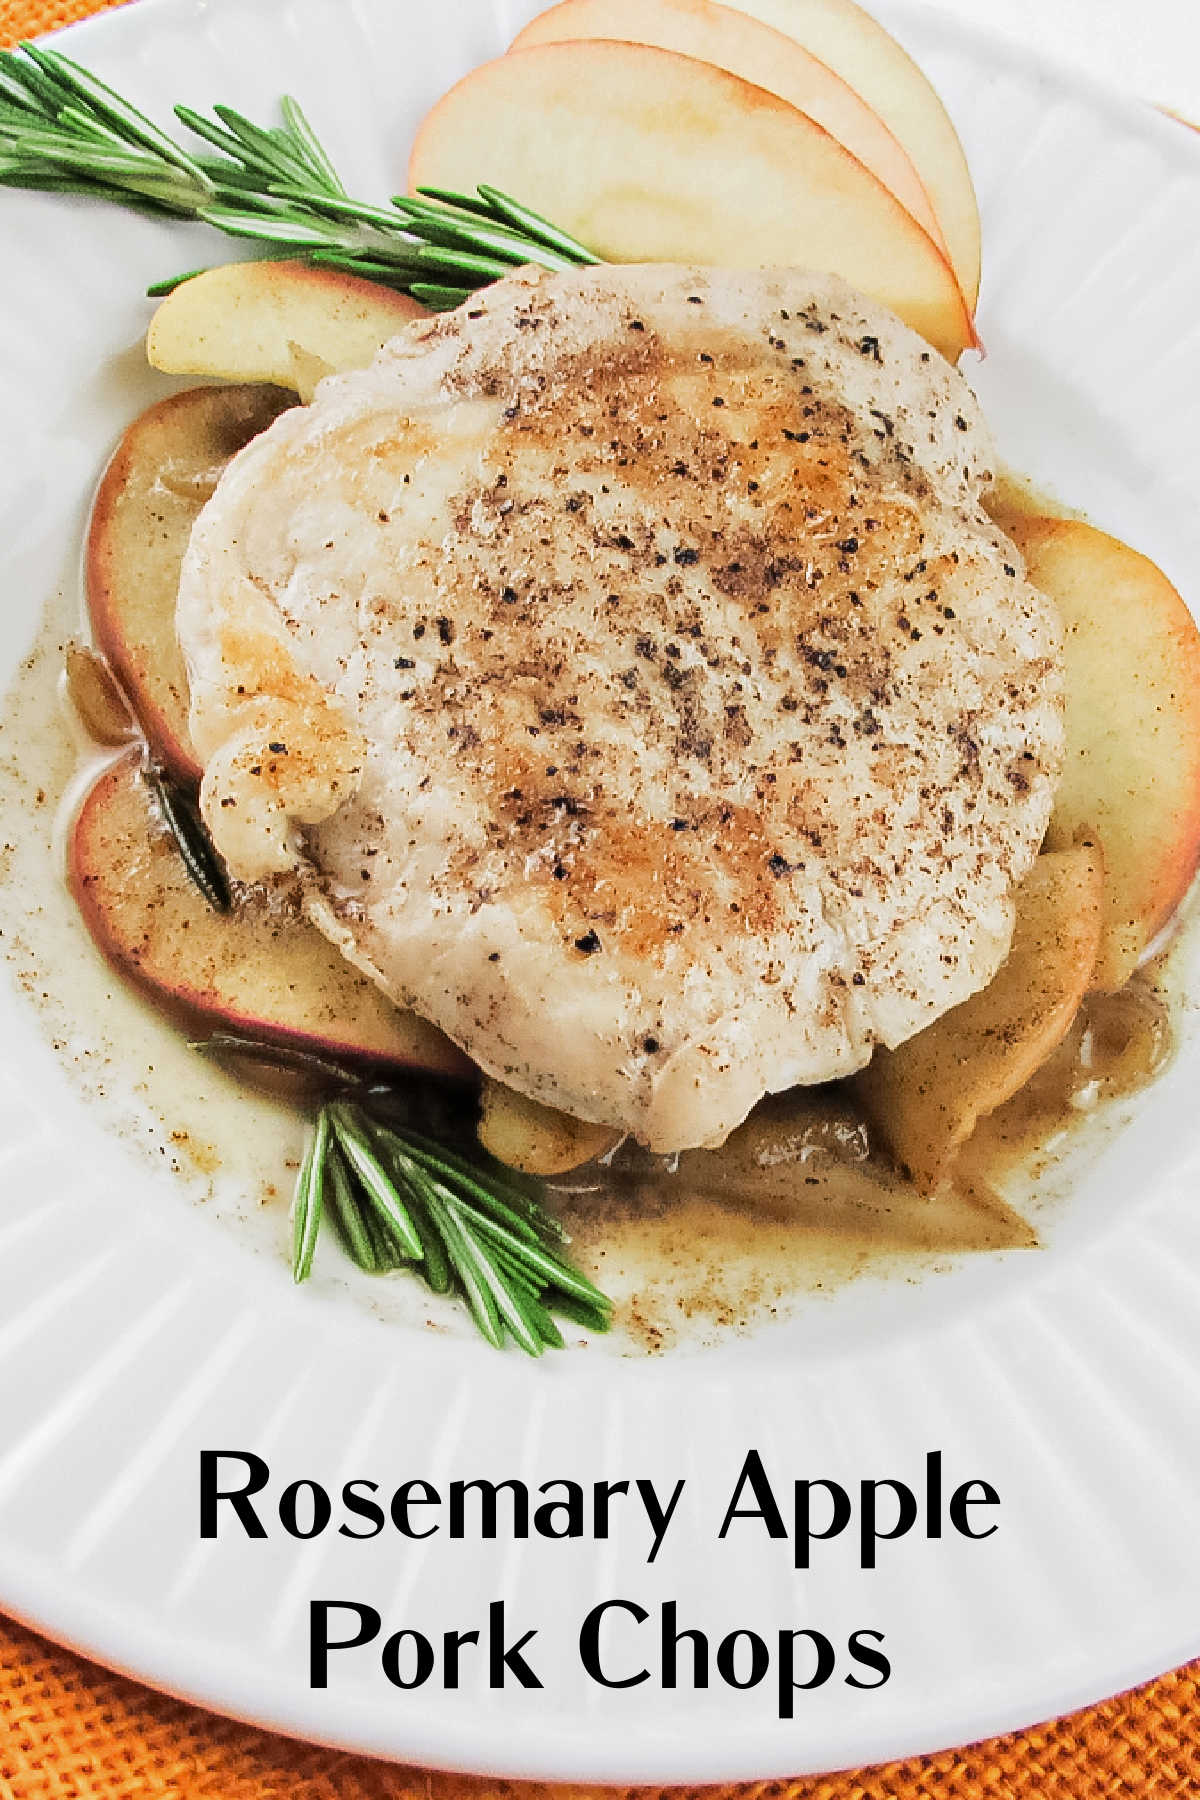 Apple rosemary pork chops is a perfect fall meal. It is quick tasty skillet supper that is full of autumnal flavors